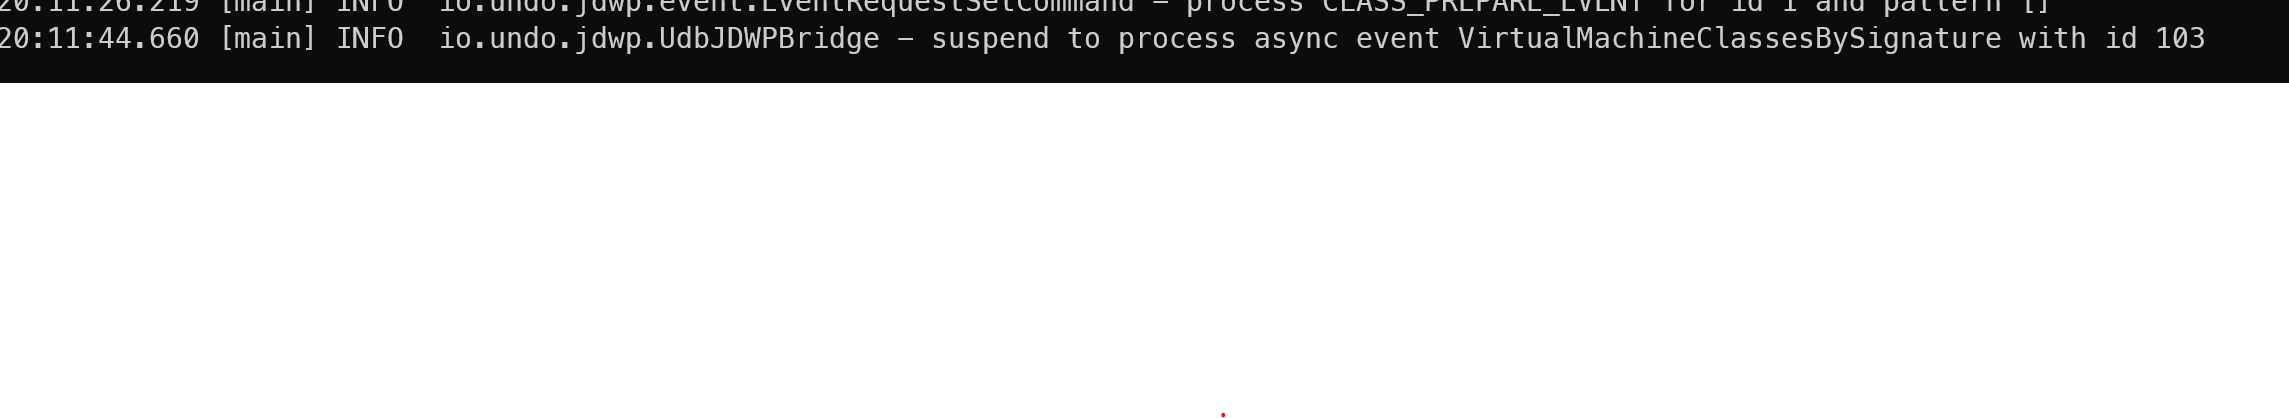 terminal text suspend to process async event VirtualMachineClassesBySignature with id 103